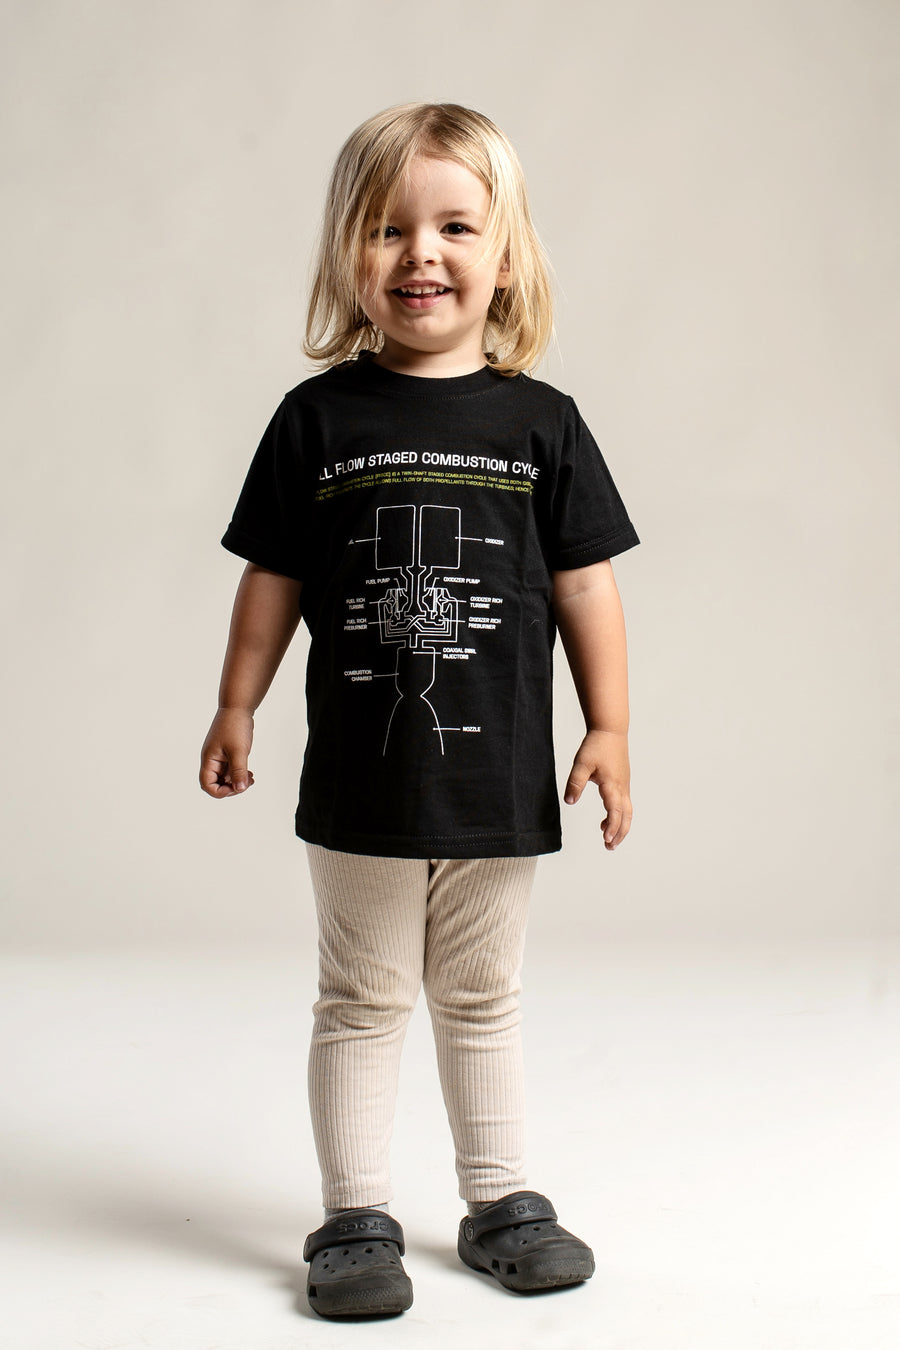 Full Flow Staged Combustion Cycle Toddler Tee